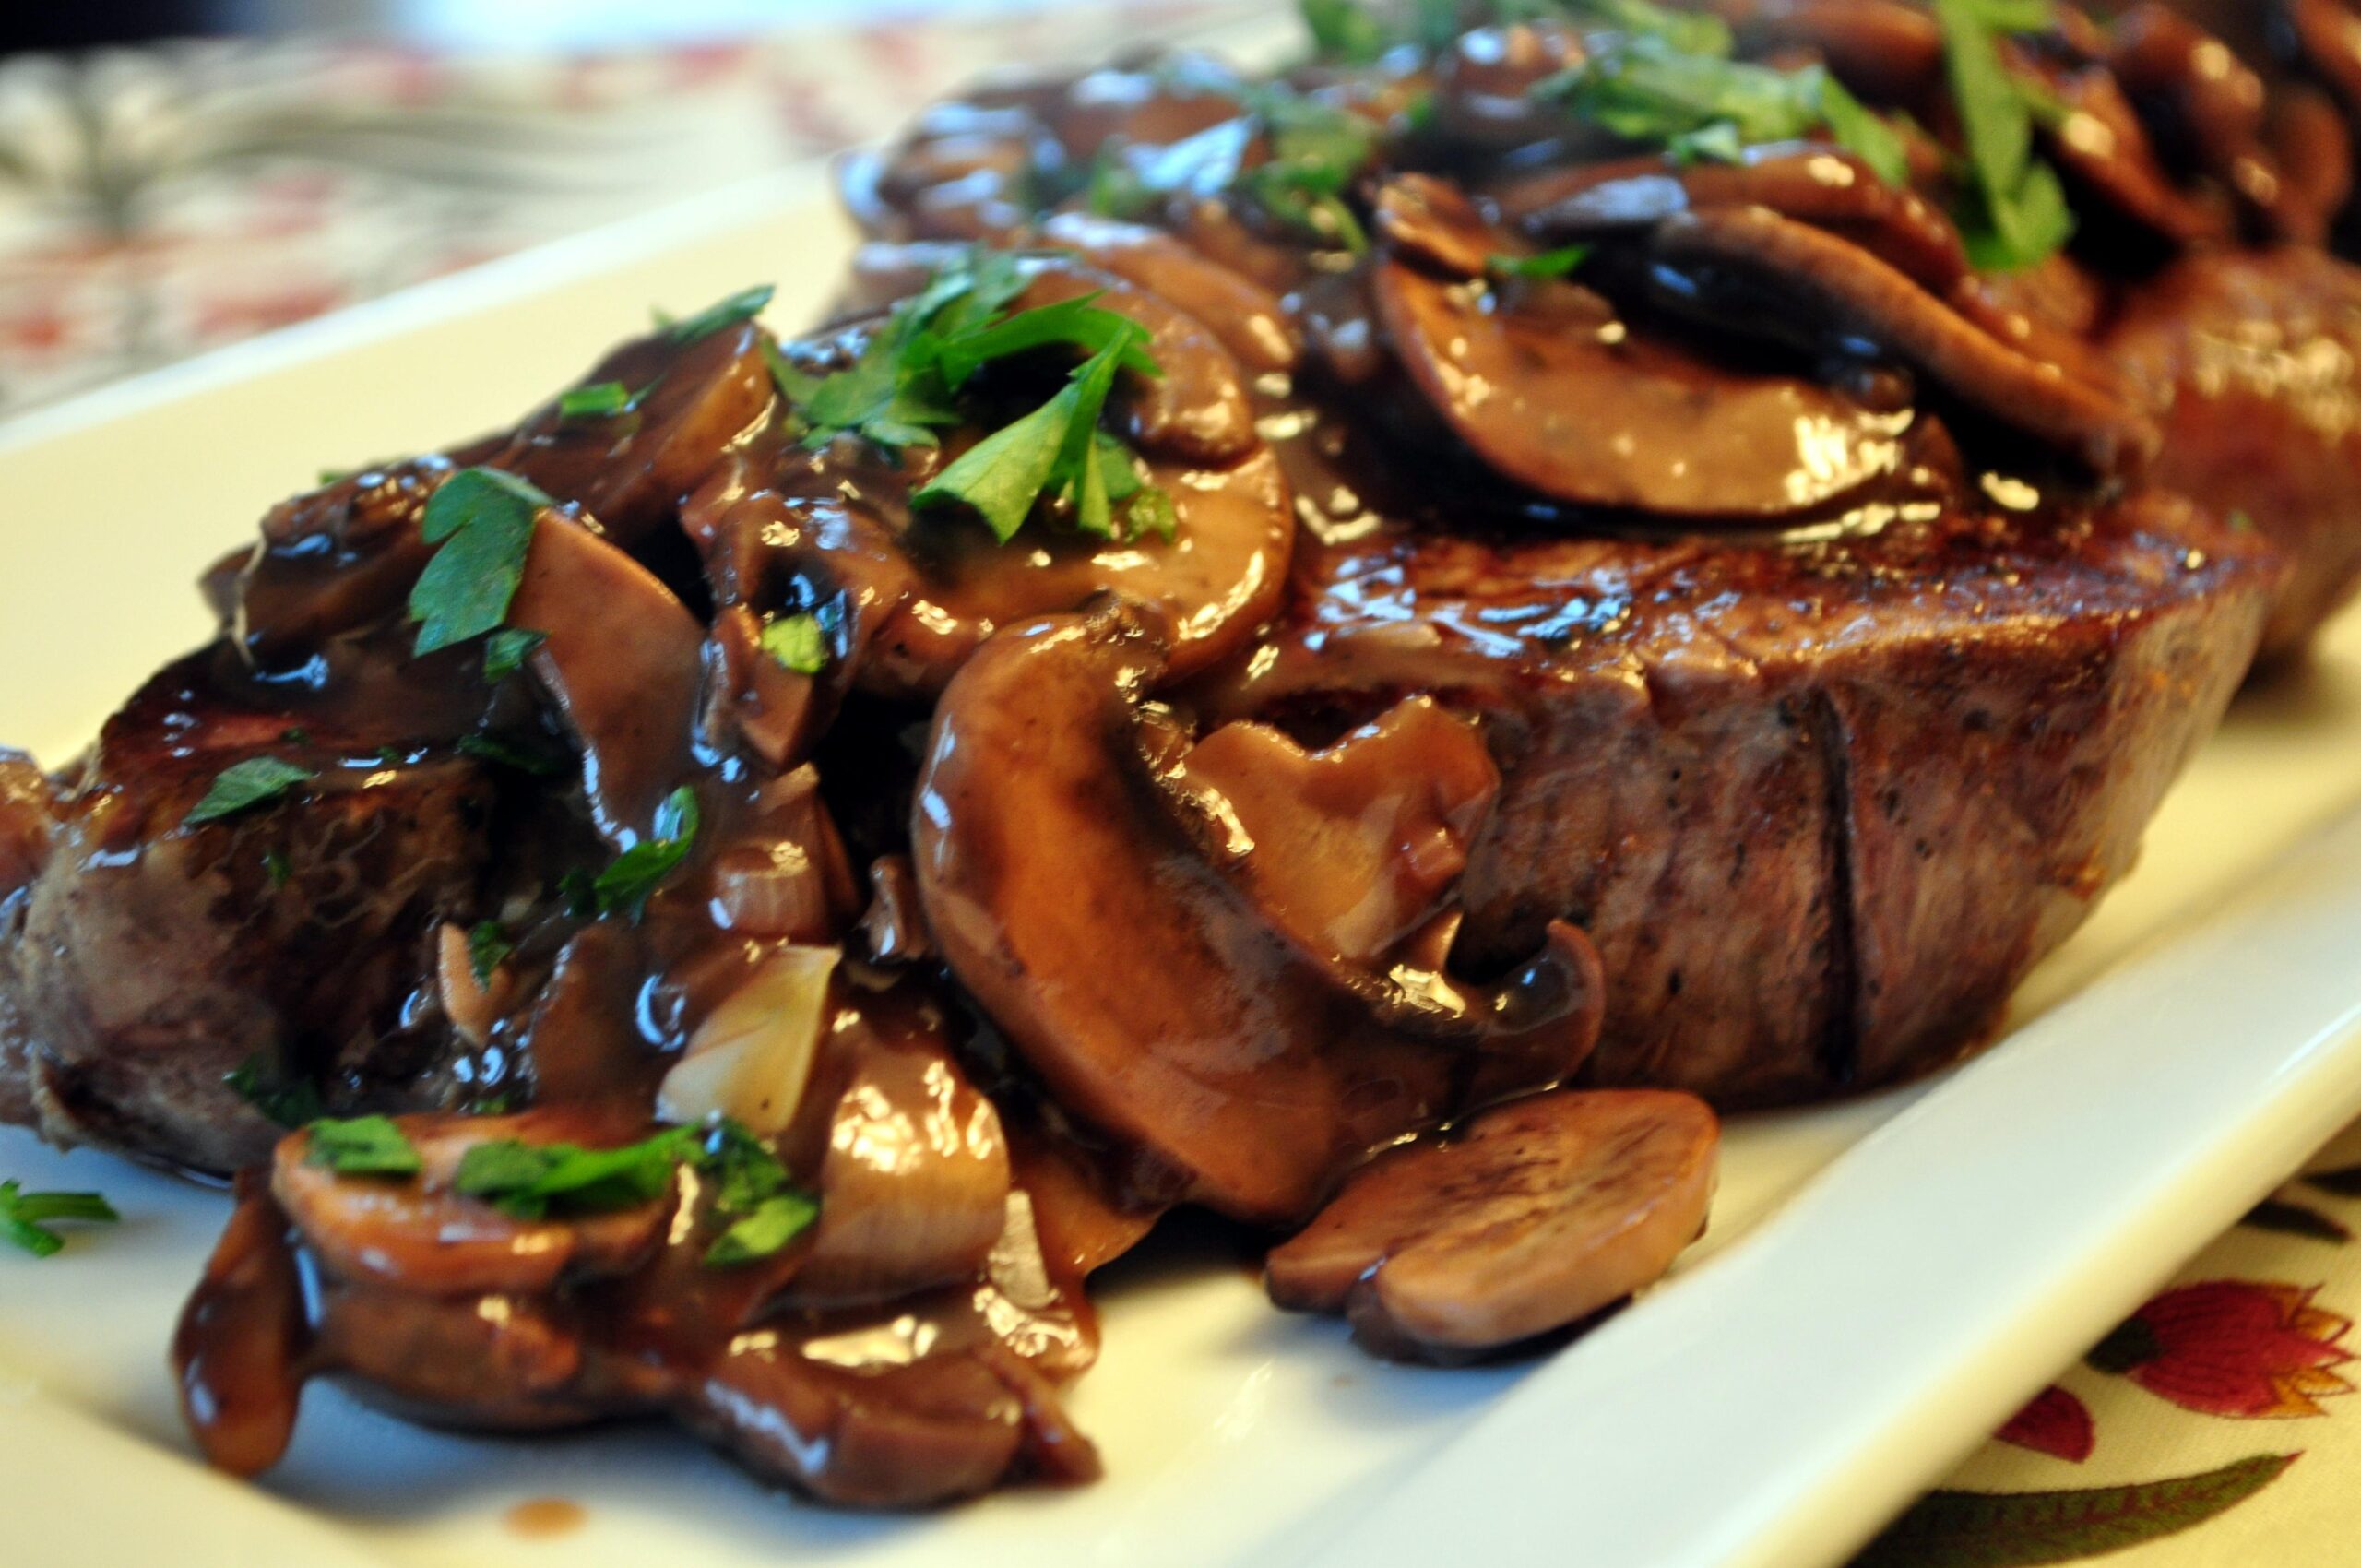  Make your steak sing with this flavorful mushroom sauce